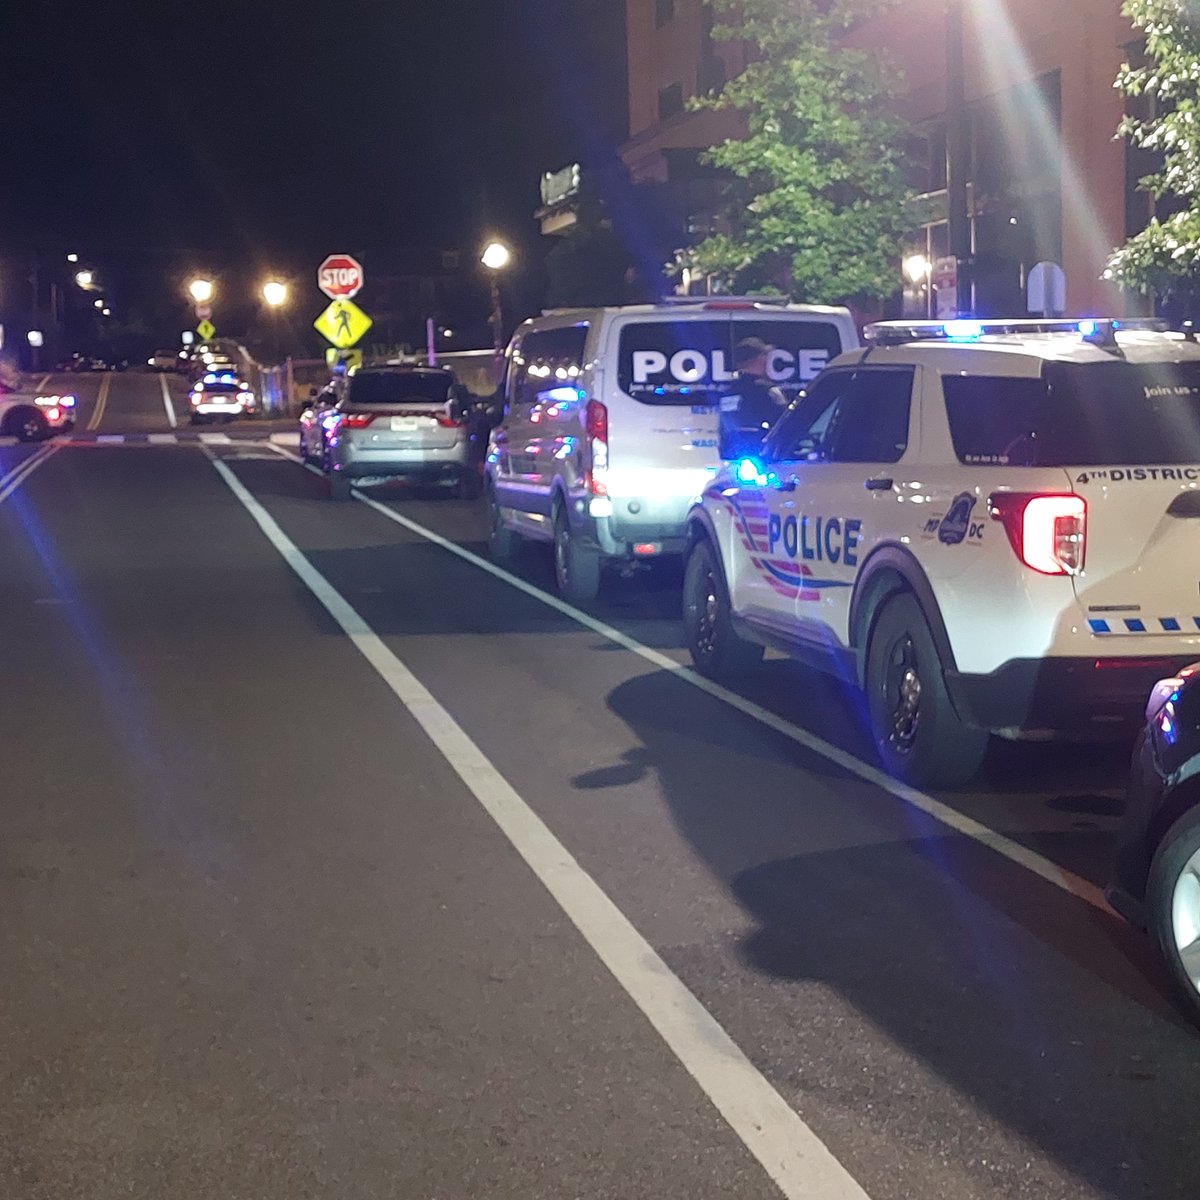 The barricade had concluded without incident. One subject is in custody. MPDIncident: MPD is on the scene of a barricade situation in the 7100 block of 12th Place, NW. 